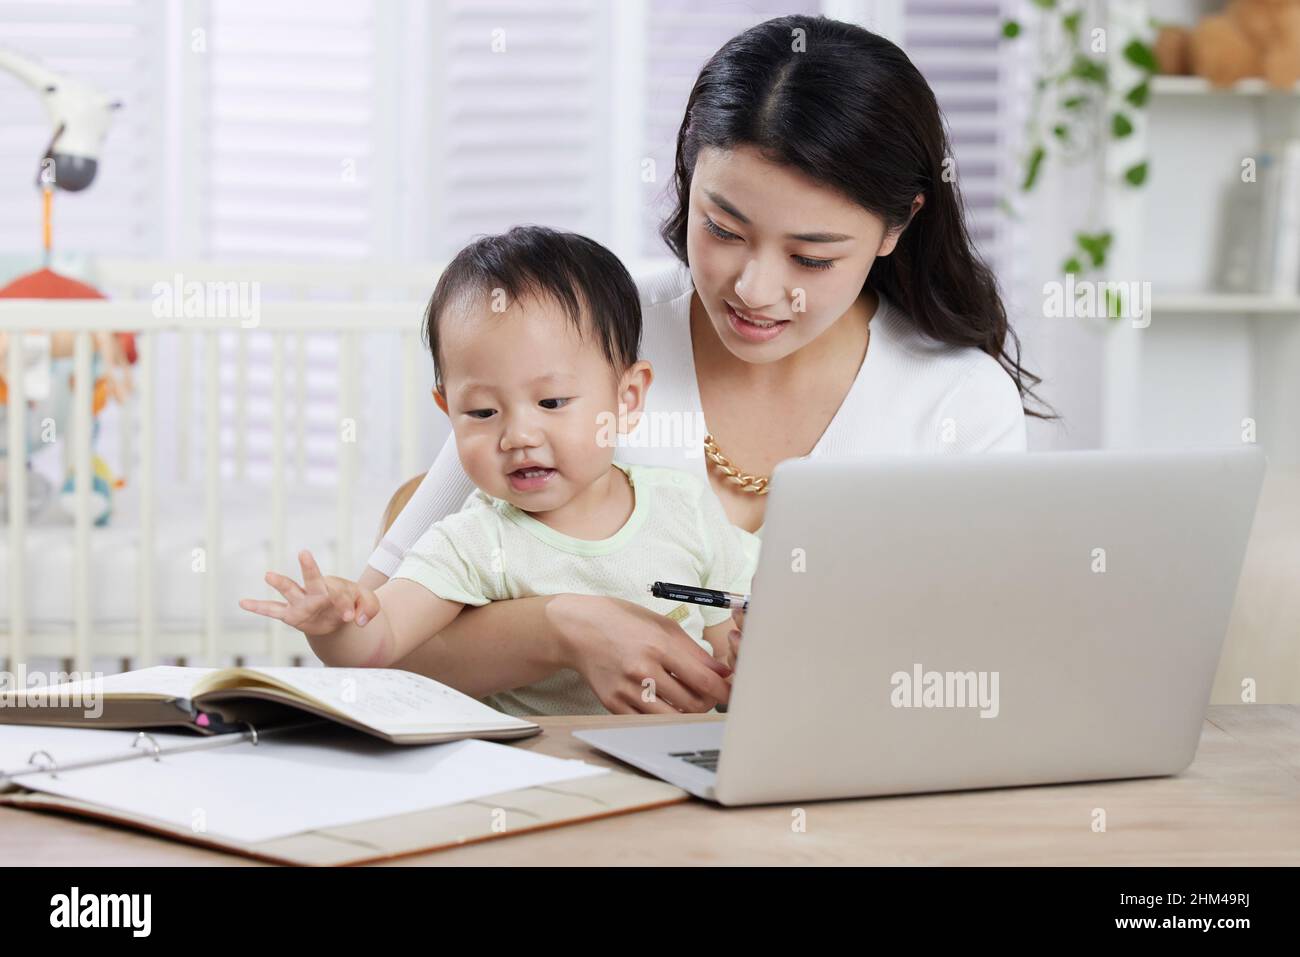 The young mother work while parenting Stock Photo